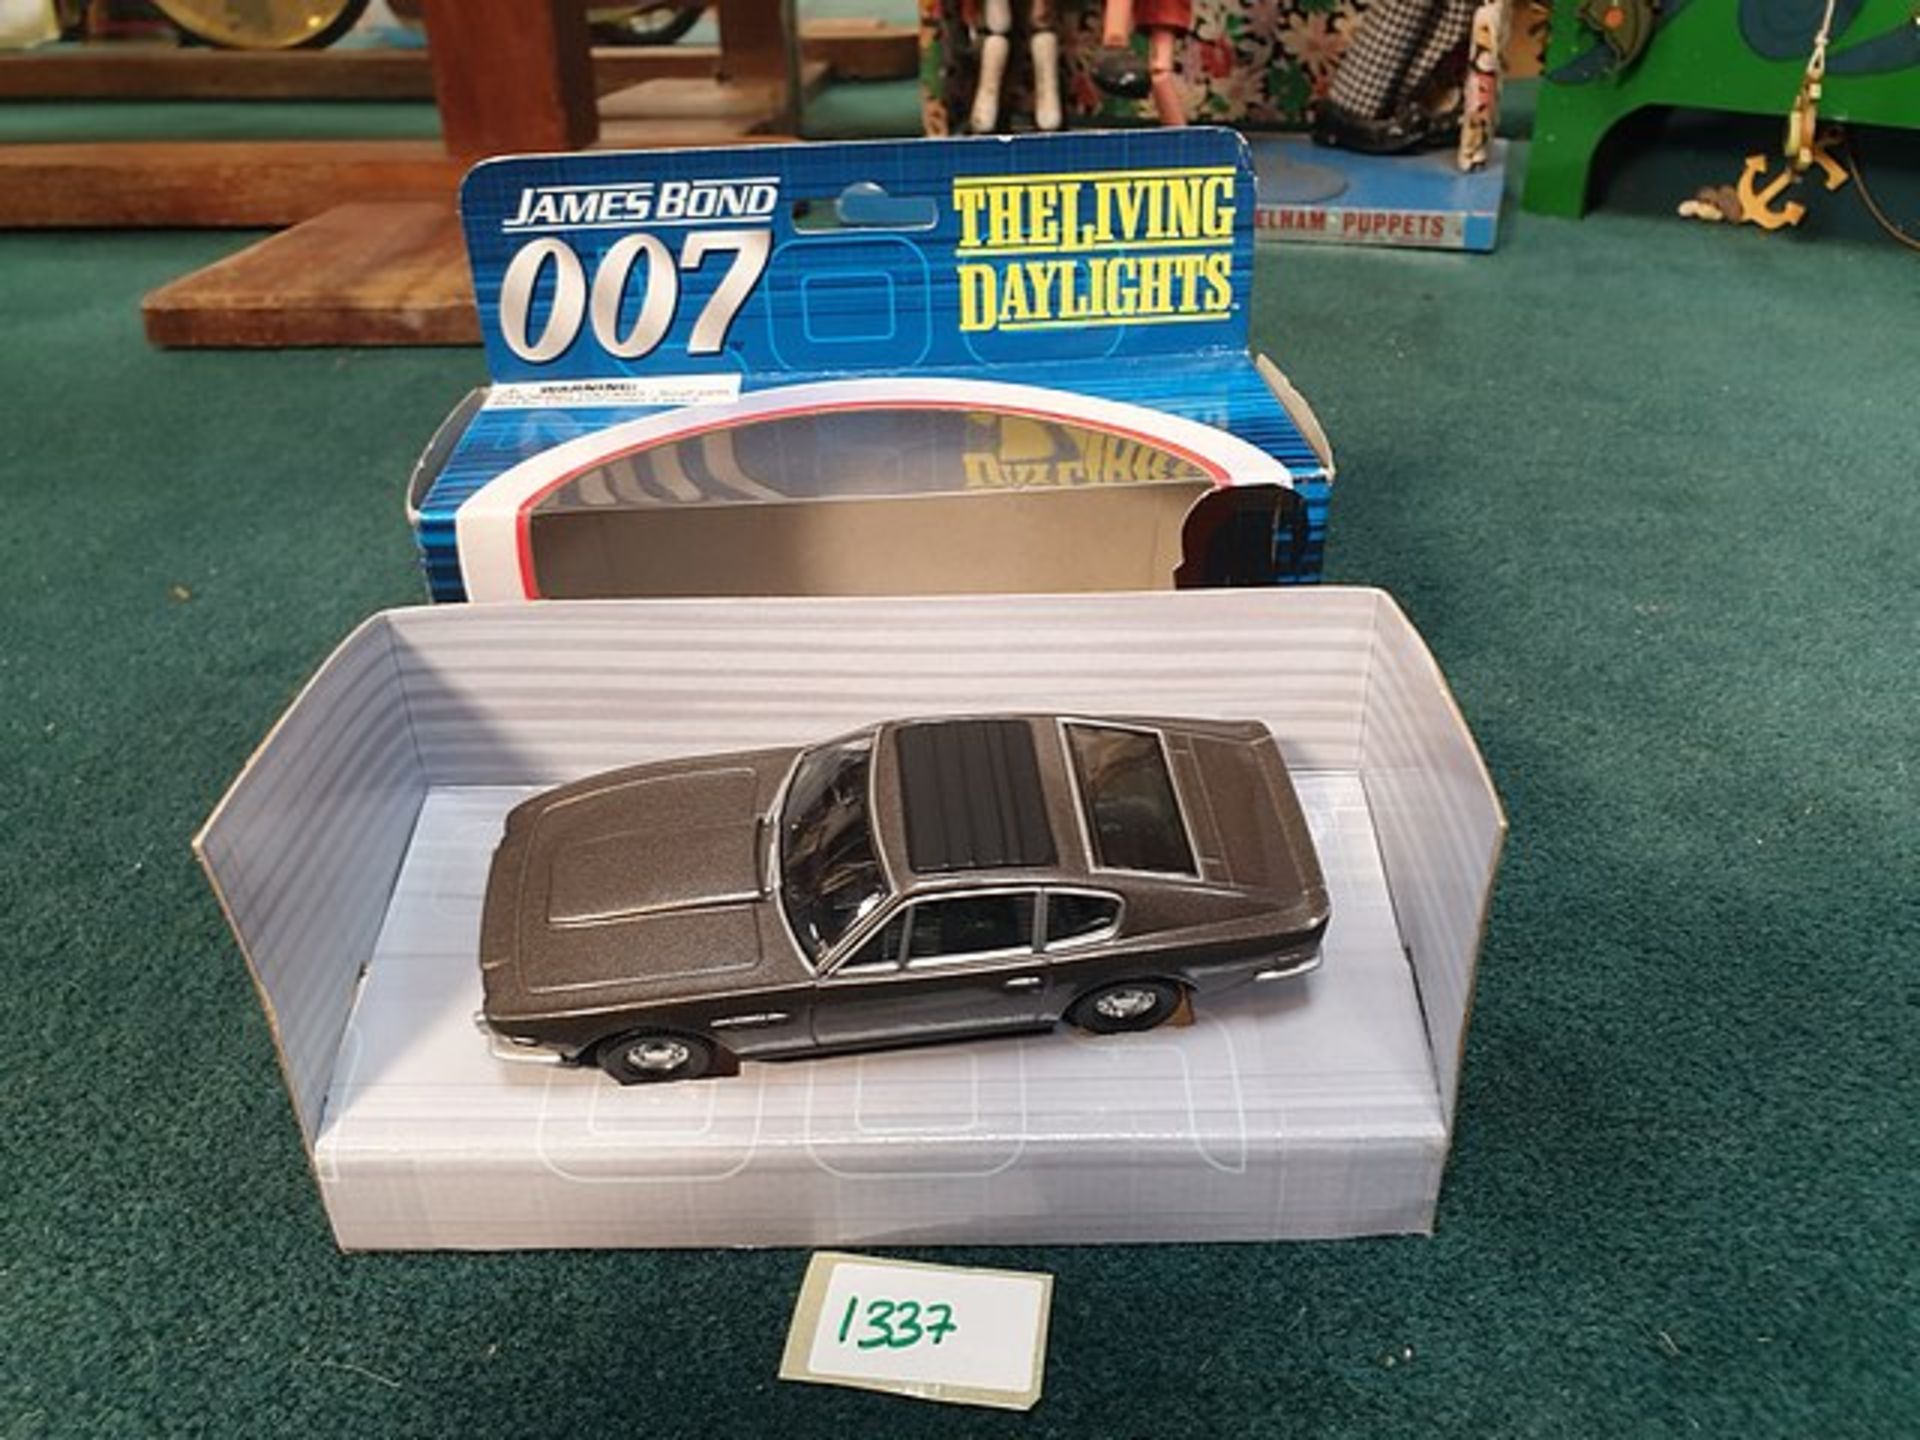 Corgi Toys #TY04802 Diecast The James Bond 007 The Ultimate Bond Collection The Living Daylights - Image 2 of 2